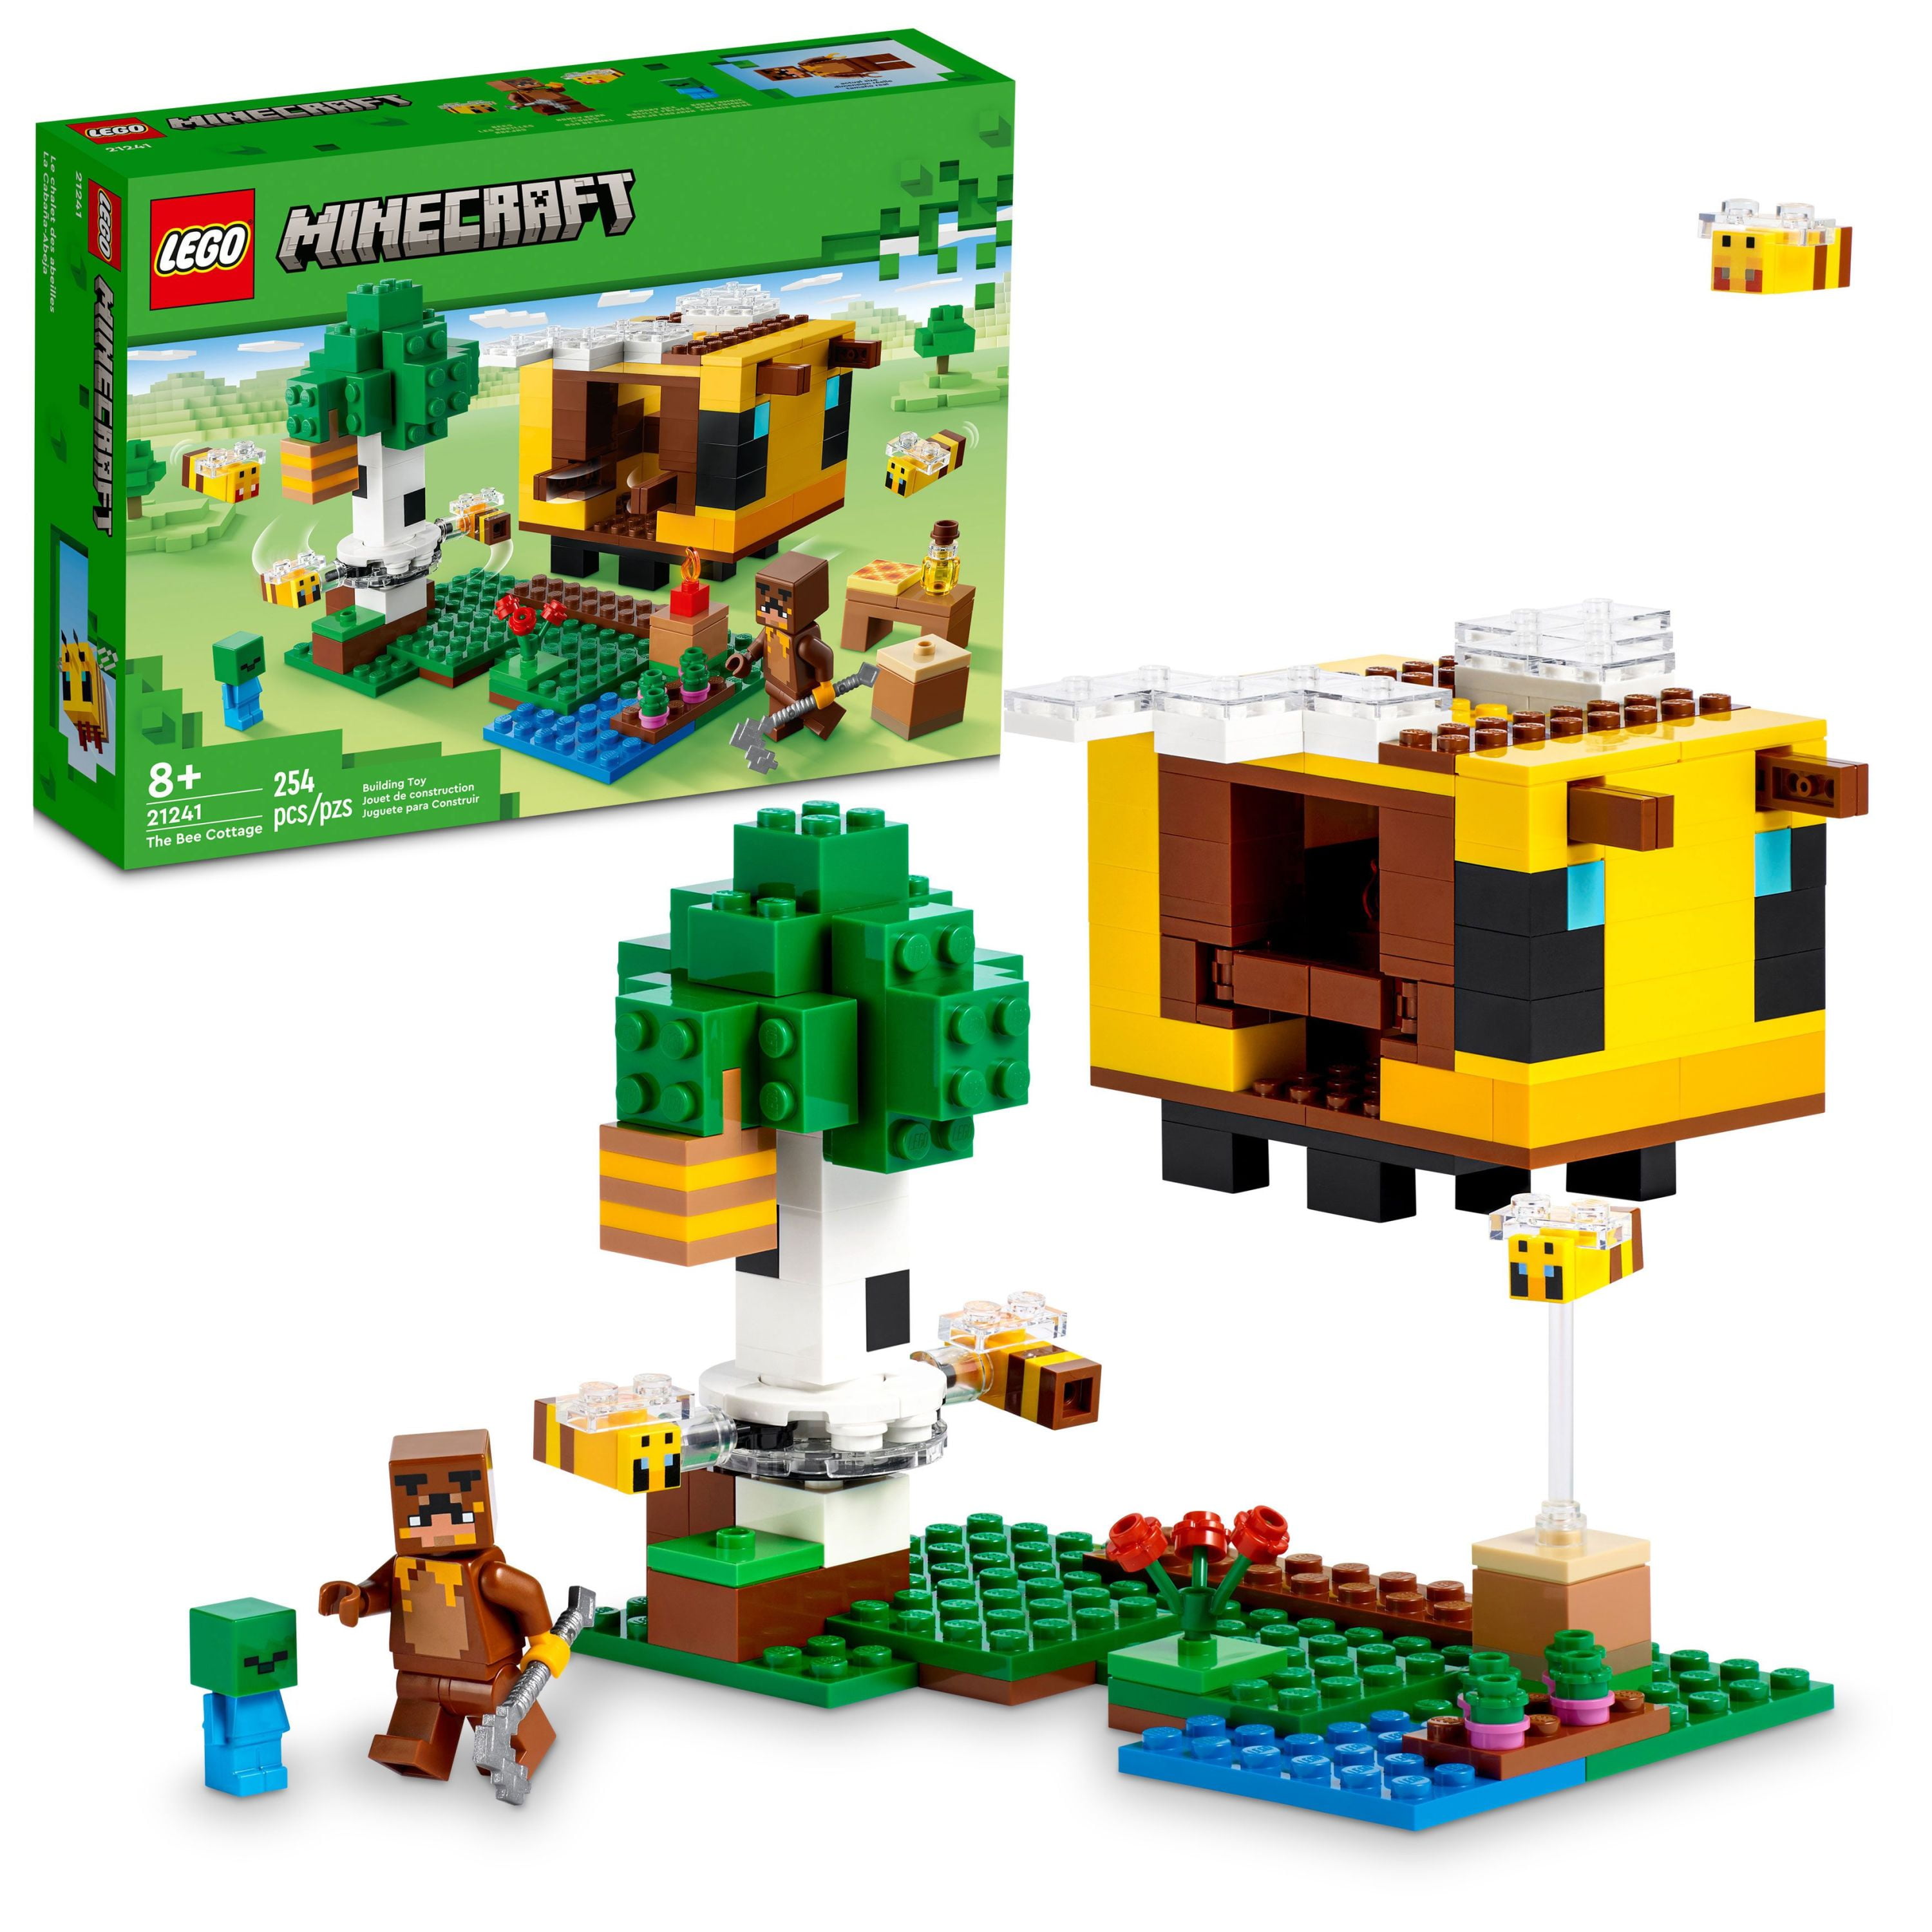 LEGO Minecraft Bee Cottage Building Set - Construction Toy with Buildable House, Farm, Baby Zombie, and Animal Figures, Game Inspired Birthday Gift Idea for Boys and Girls Ages 8+ Walmart.com